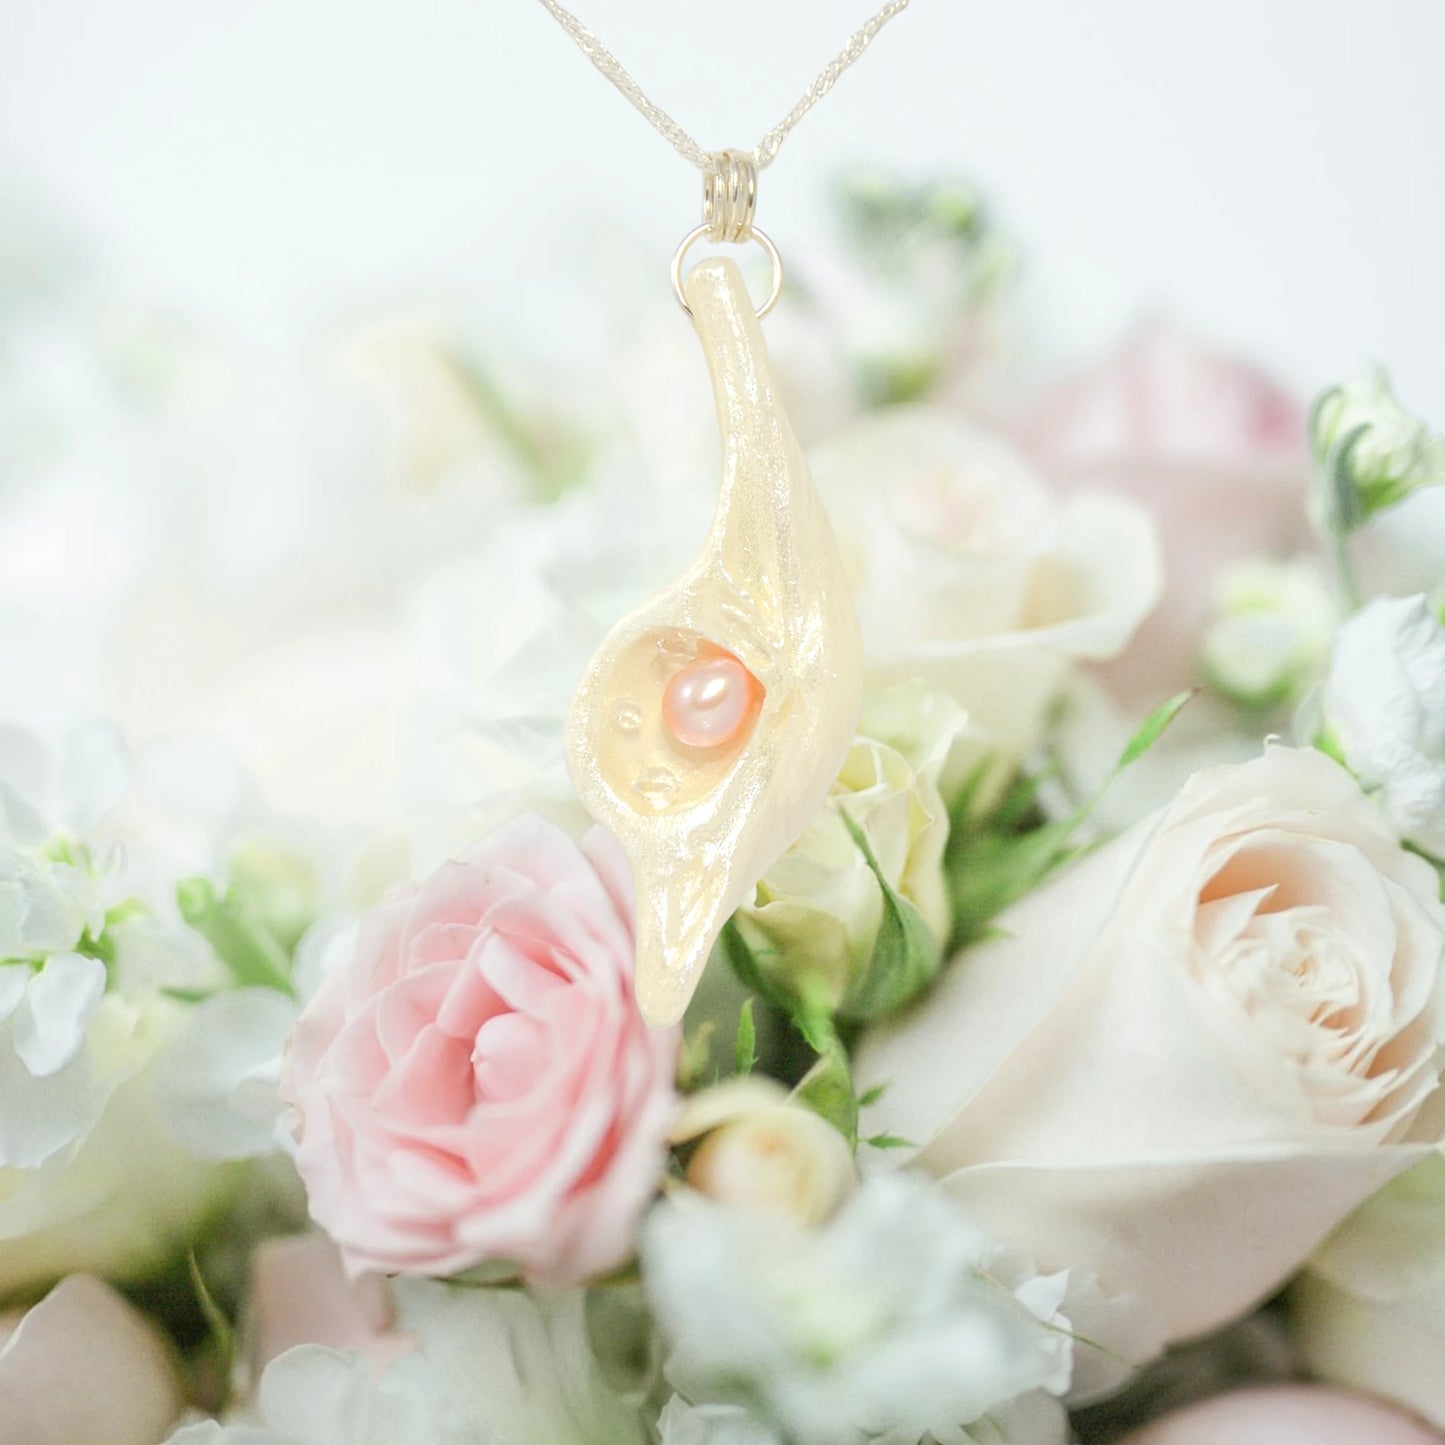 The pendant champagne on ice is shown hanging from a necklace over a beautiful bouquet of pink and white rose.  Special occasions come to mind wedding, engagement, birthday, anniversary, bridesmaid, Christmas, Valentines .